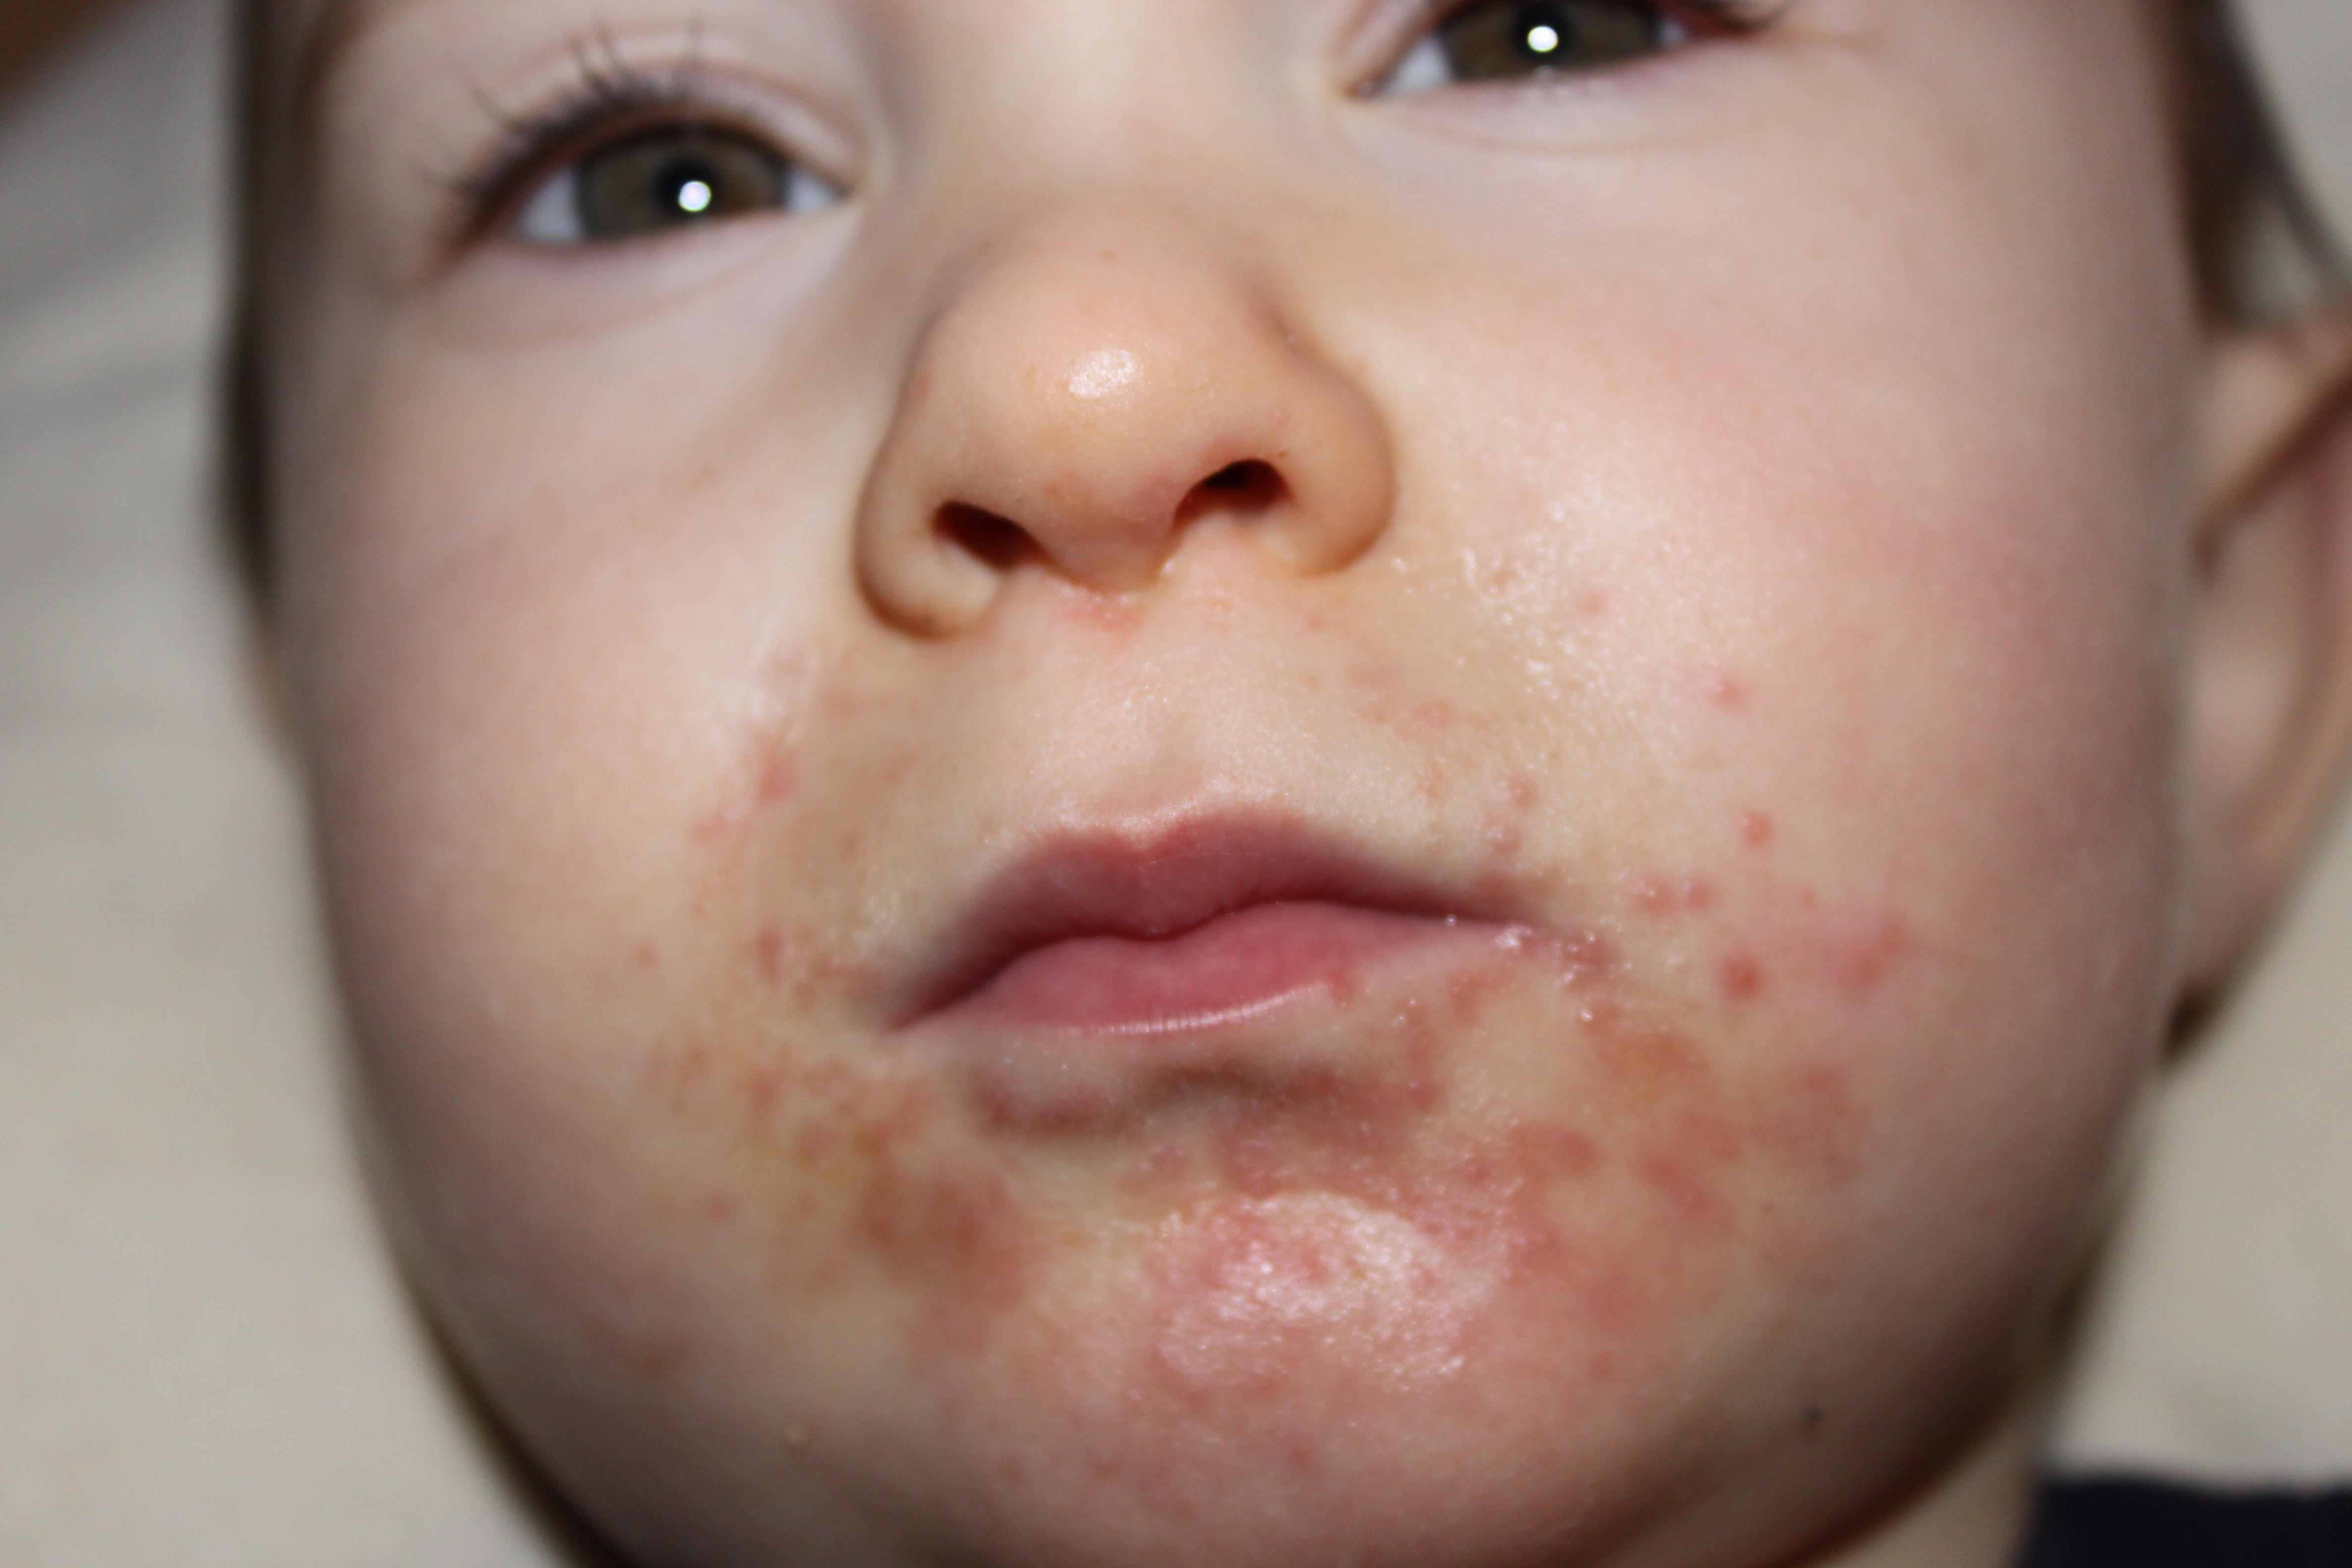 childrens rash around mouth pictures, photos